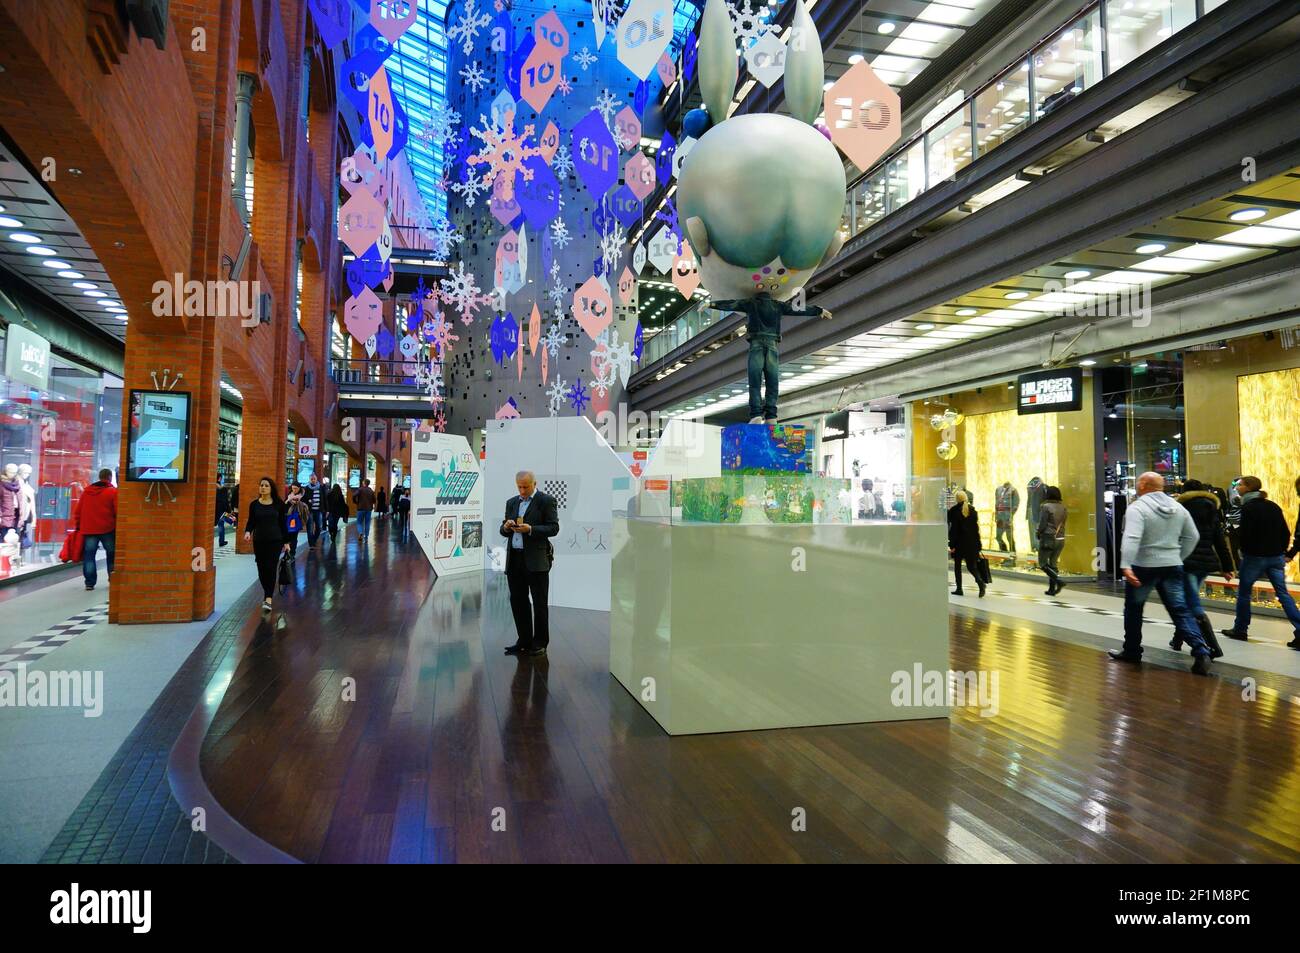 POZNAN, POLAND - Dec 01, 2013: Many shops and people with figurine in the Stary Browar shopping mall. Stock Photo